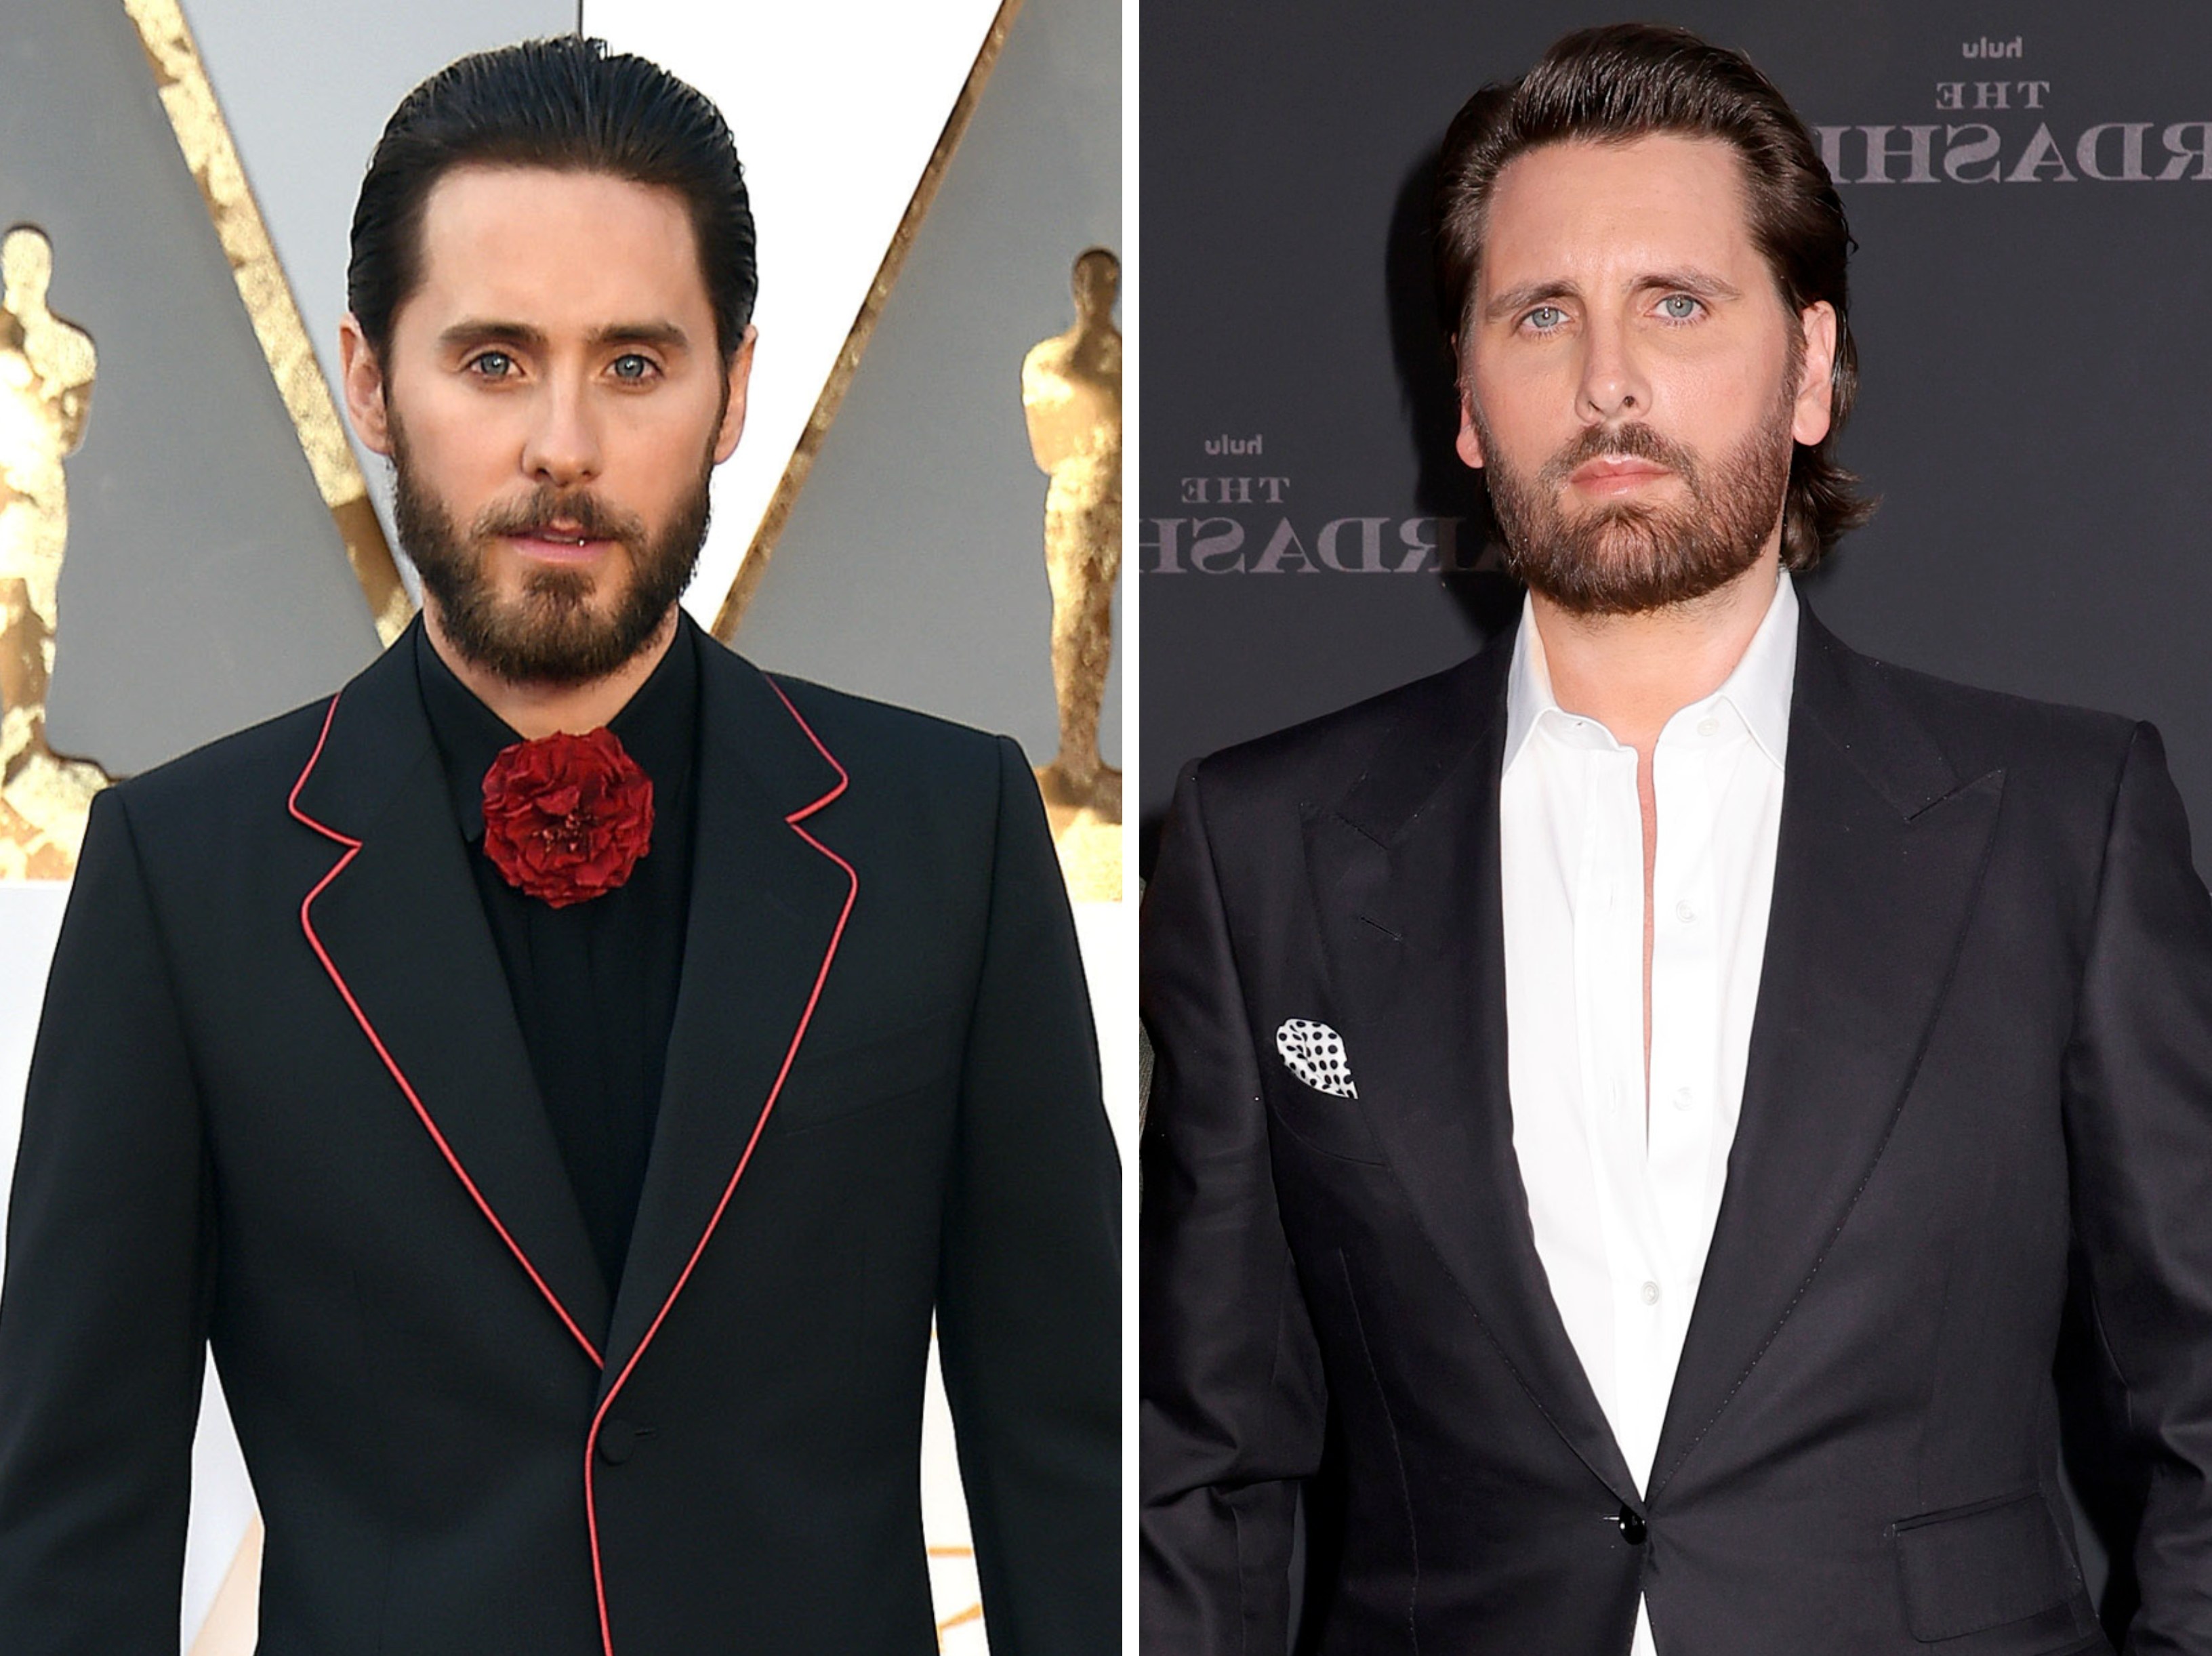 There’s a TikTok theory that Jared Leto and Scott Disick are long-lost twins ... and the actor just commented on it in an interview. Photo: Getty Images, Zuma Press/Corbis